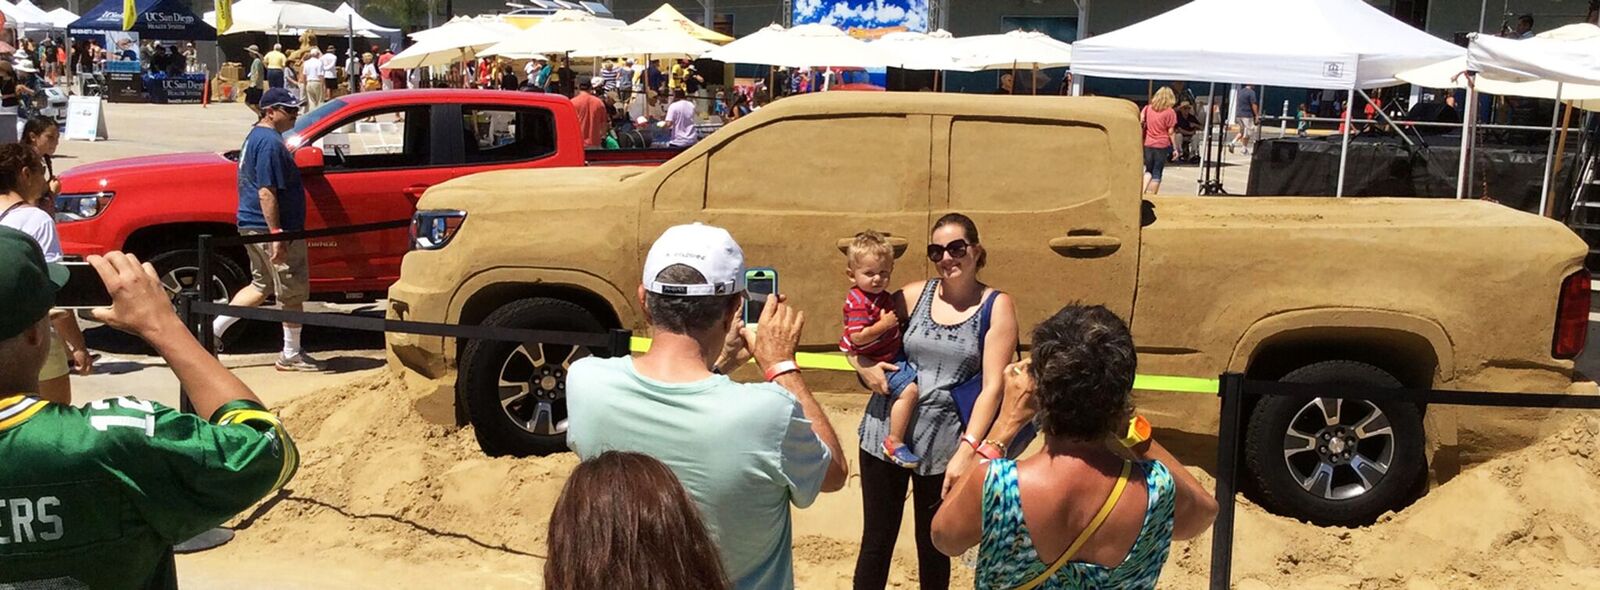 a man taking a picture of a woman with her child in a car sand sculpture